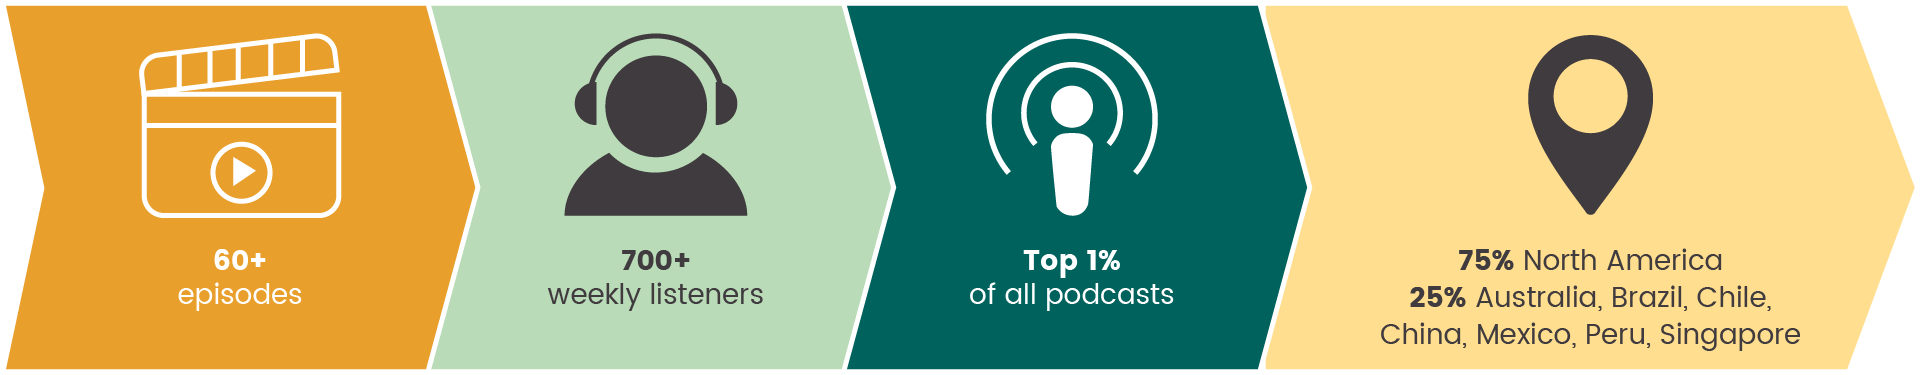 CMS ALT TEXT Infographic for IFPA Podcast showing: 60+ episodes, 700+ weekly listeners, Top 1% of all podcasts.